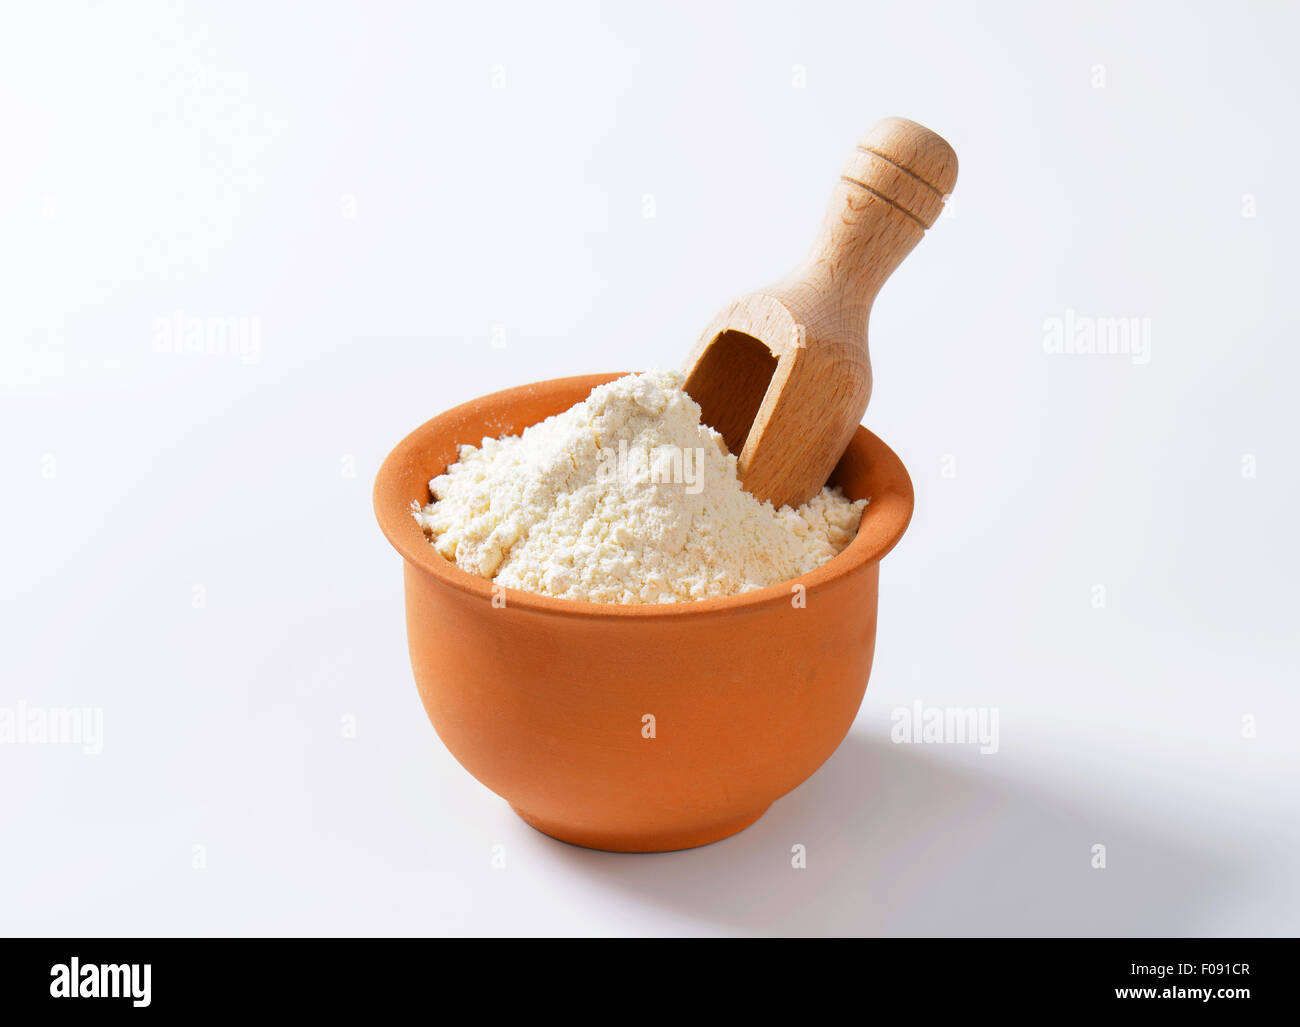 Finely ground flour and wooden scoop in terracotta bowl Stock Photo